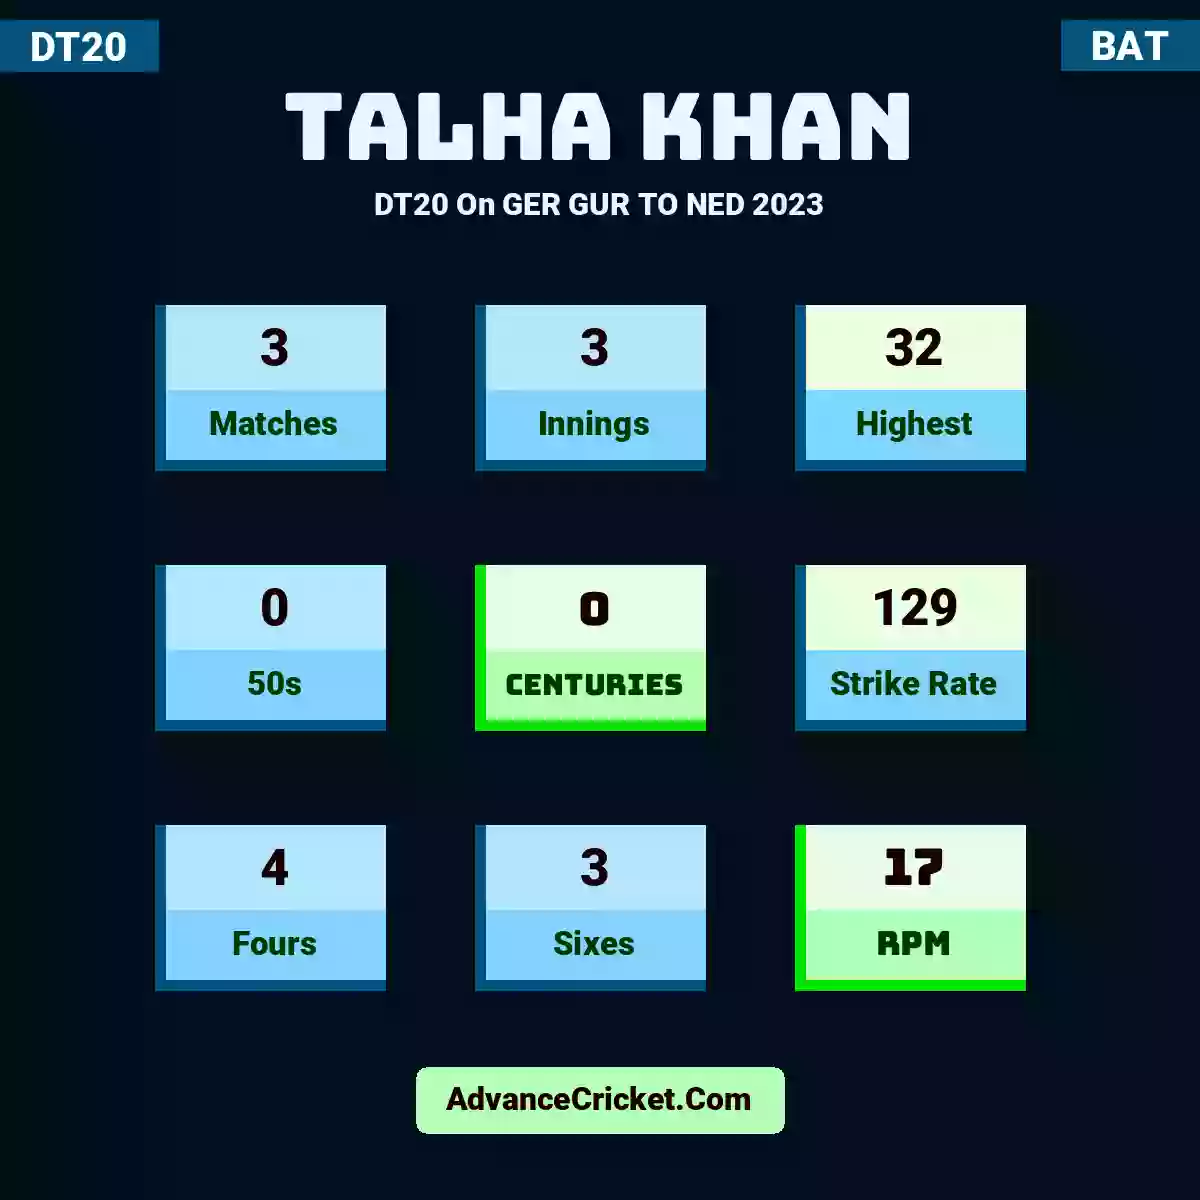 Talha Khan DT20  On GER GUR TO NED 2023, Talha Khan played 3 matches, scored 32 runs as highest, 0 half-centuries, and 0 centuries, with a strike rate of 129. T.Khan hit 4 fours and 3 sixes, with an RPM of 17.